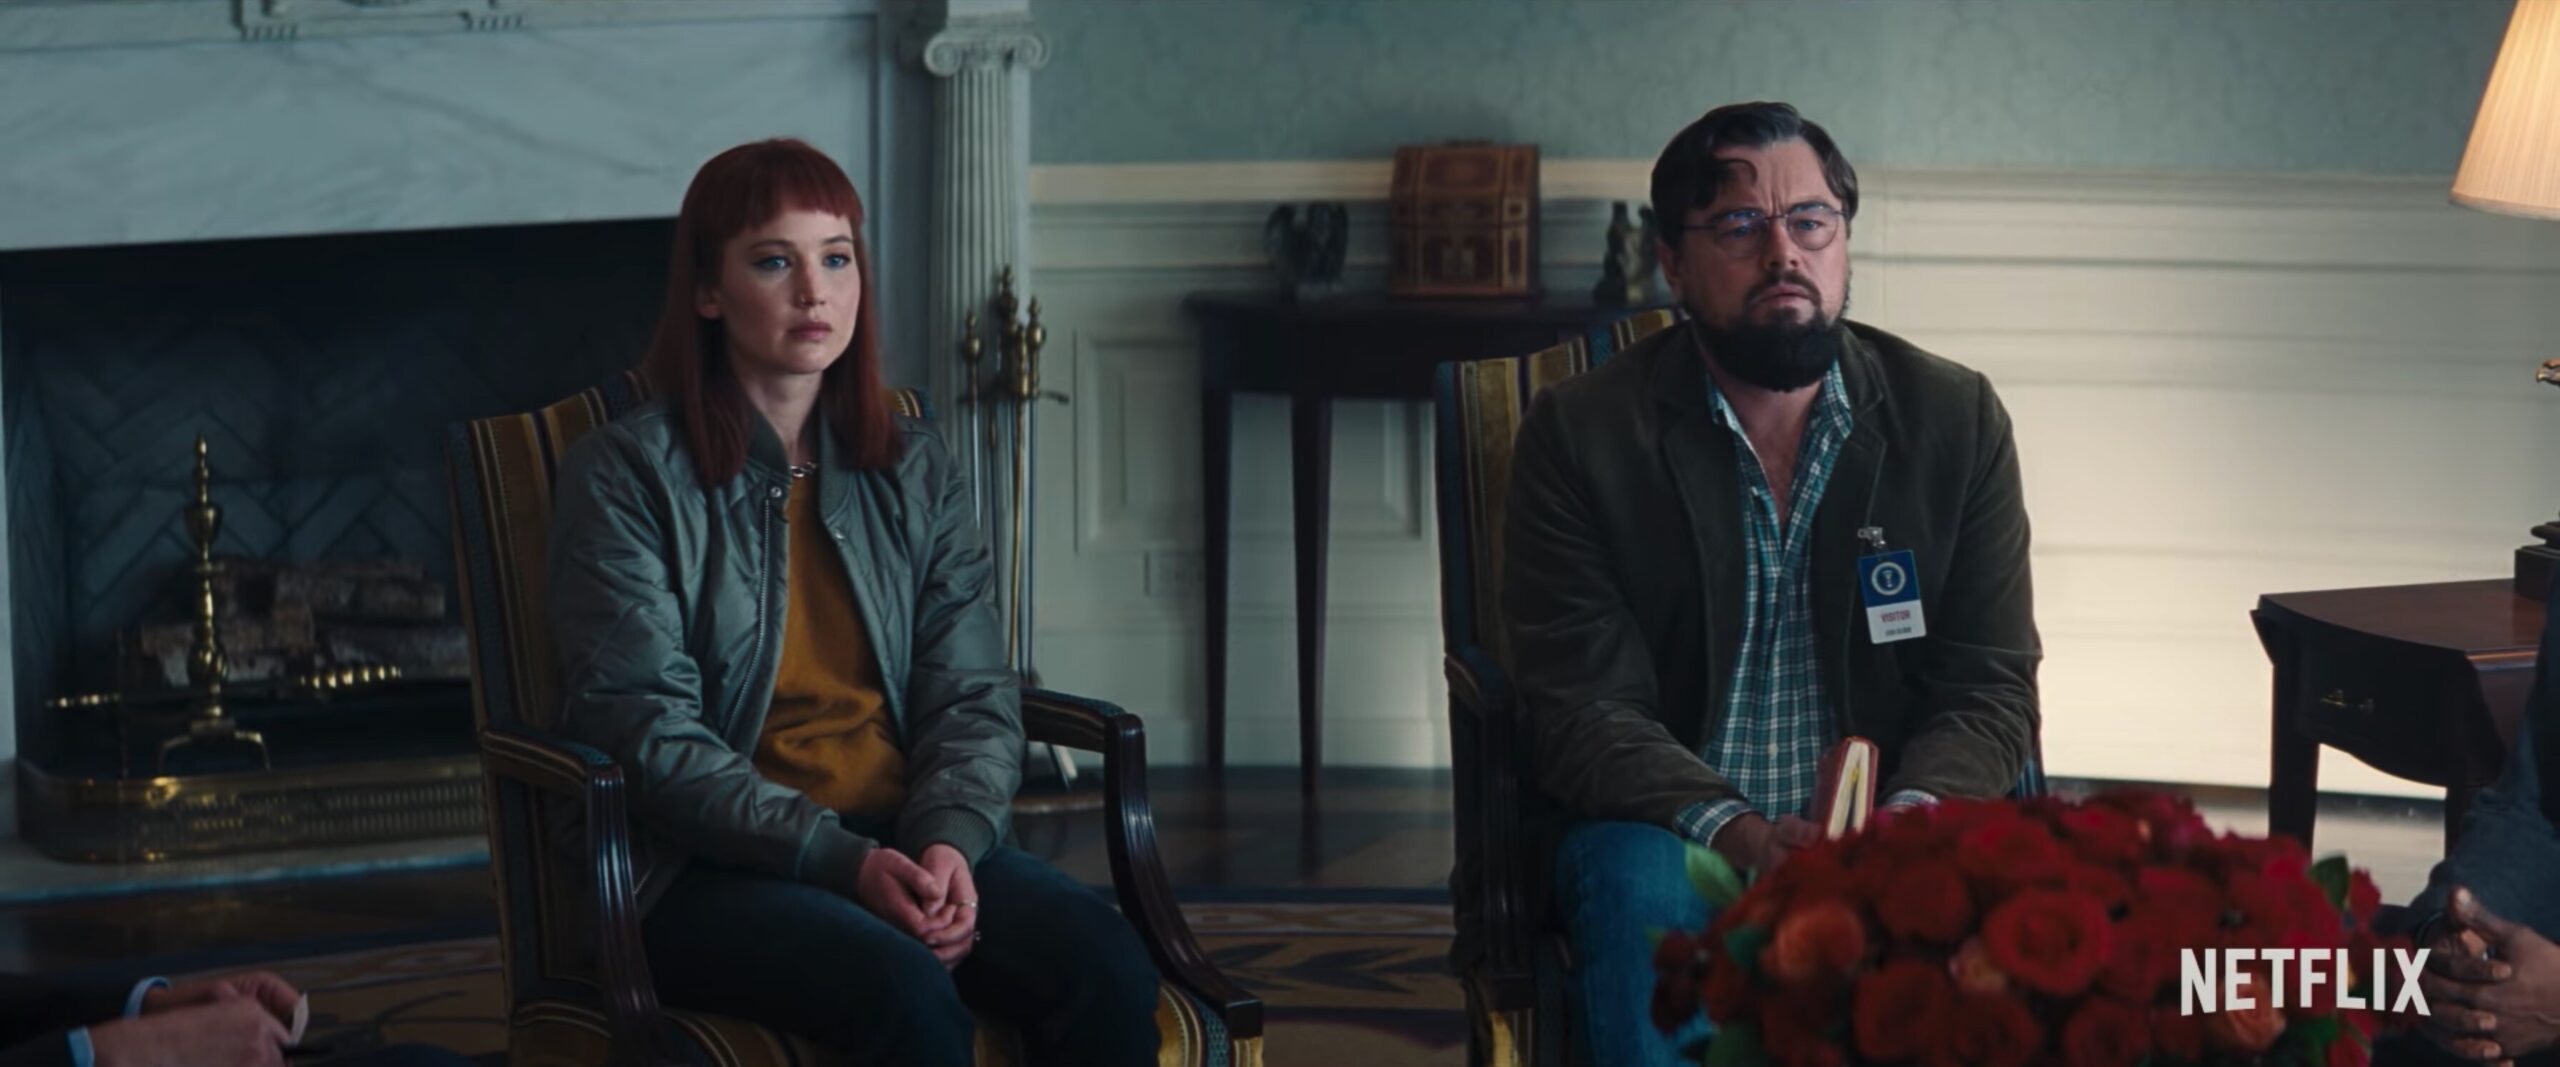 <i>Netflix</i><br/>'Don't Look Up' trailer is here and it's filled with every celebrity imaginable.